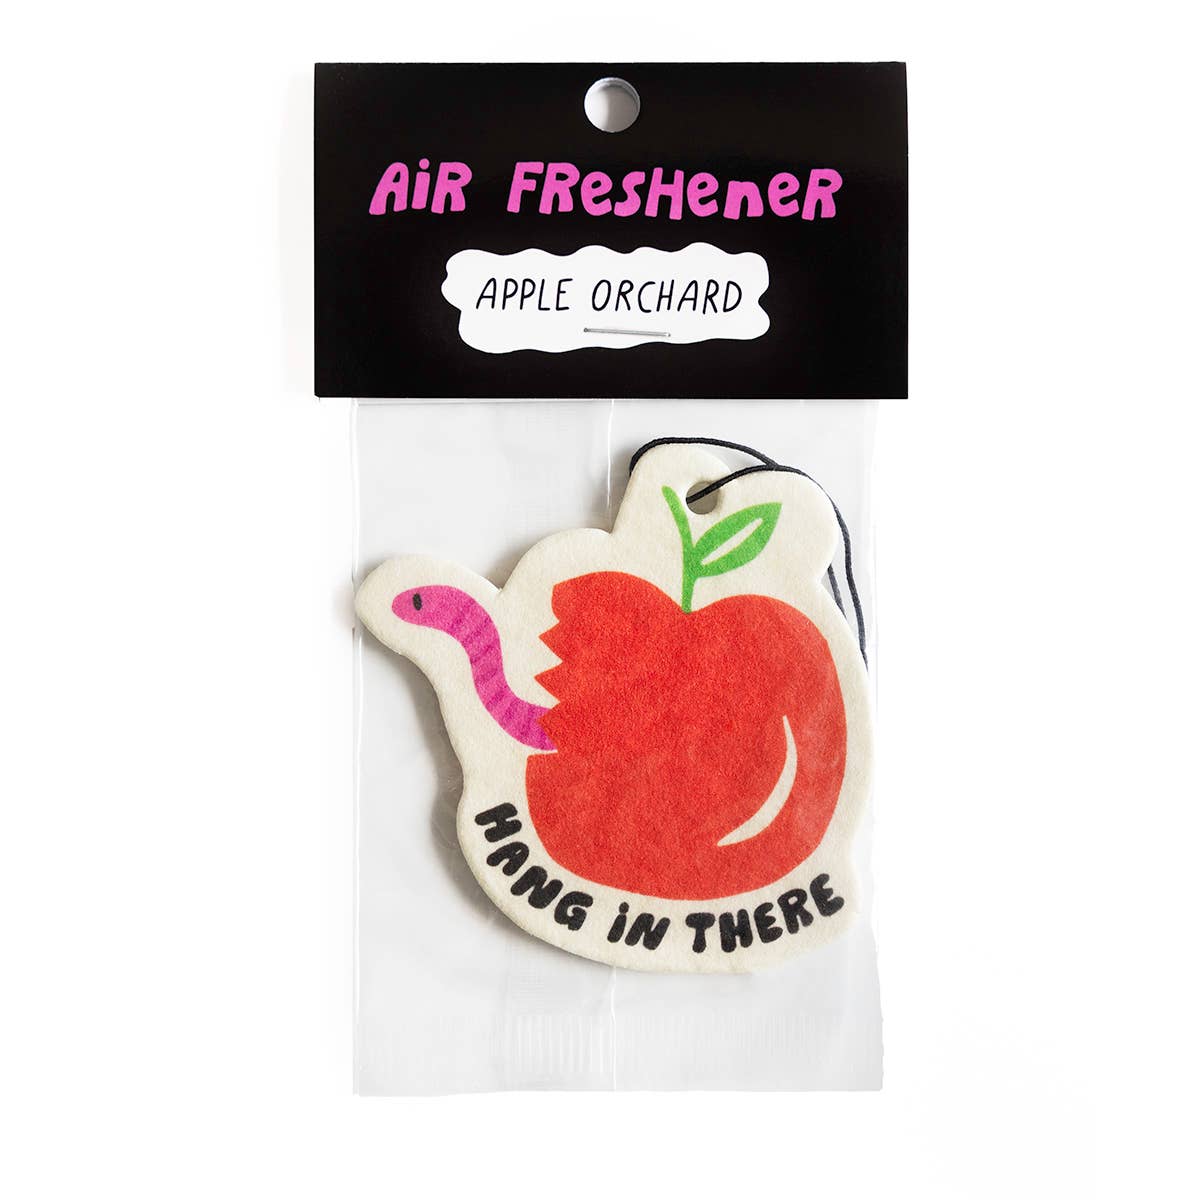 apple scented air freshener -- image is an apple with a worm coming out of it and reads "hang in there" 